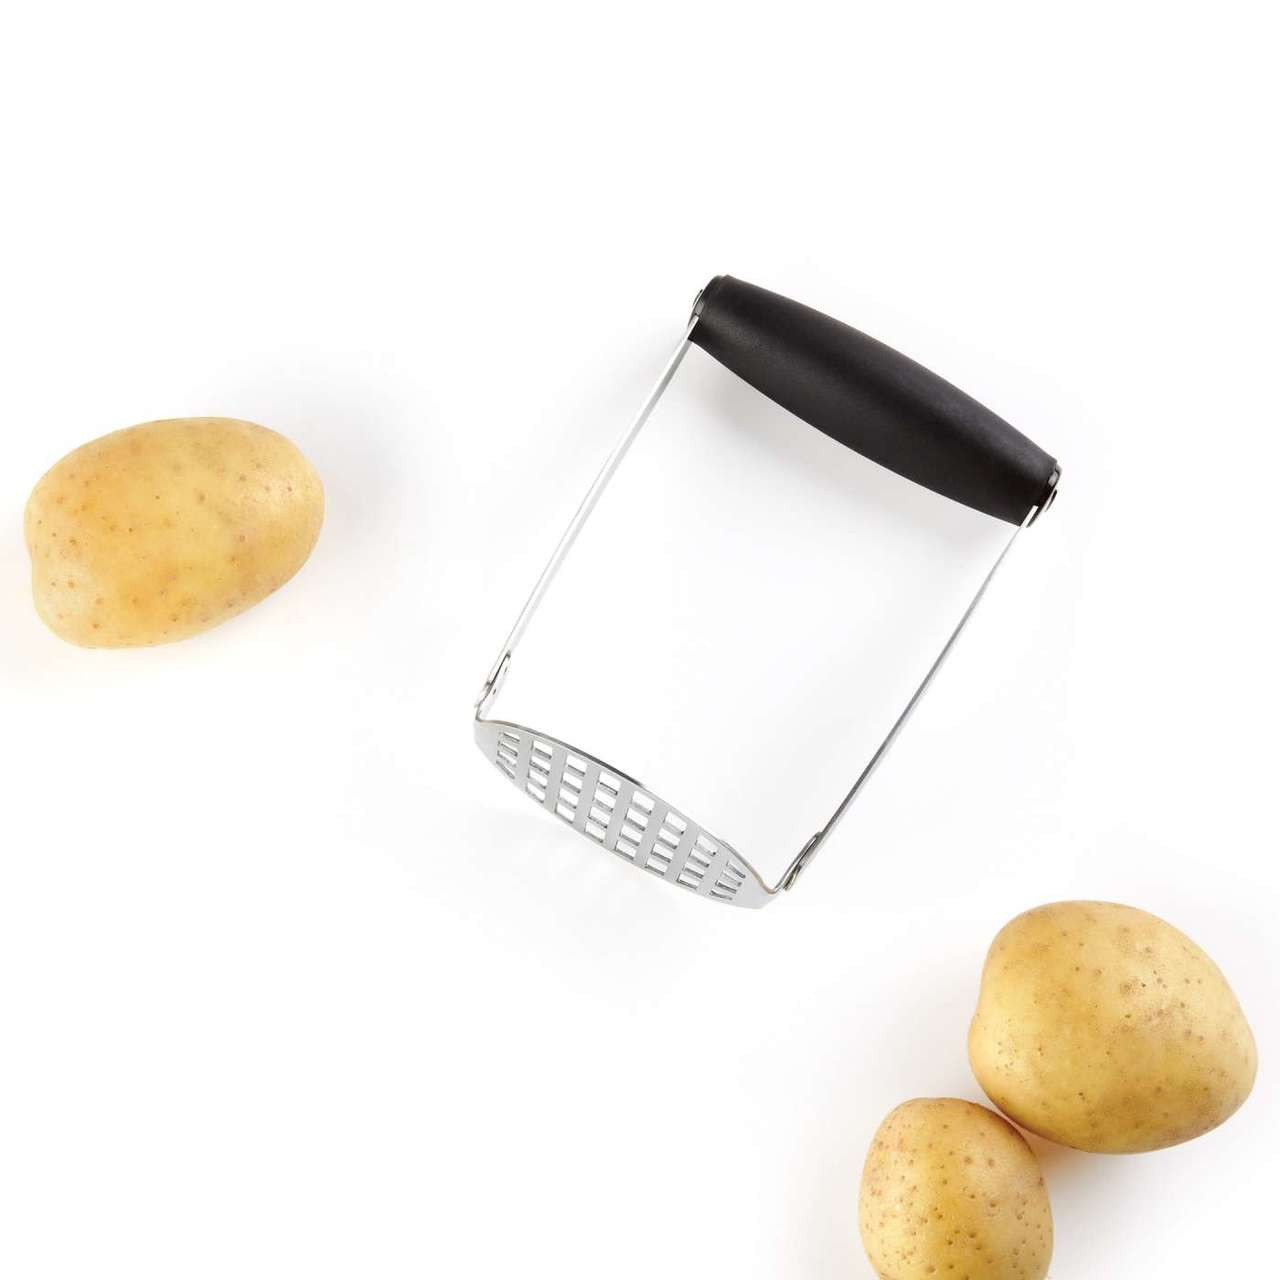 https://cdn11.bigcommerce.com/s-w2svhstmra/images/stencil/1280x1280/products/3349/6402/34581_4_smooth_potato_masher__61536.1506530057.jpg?c=2